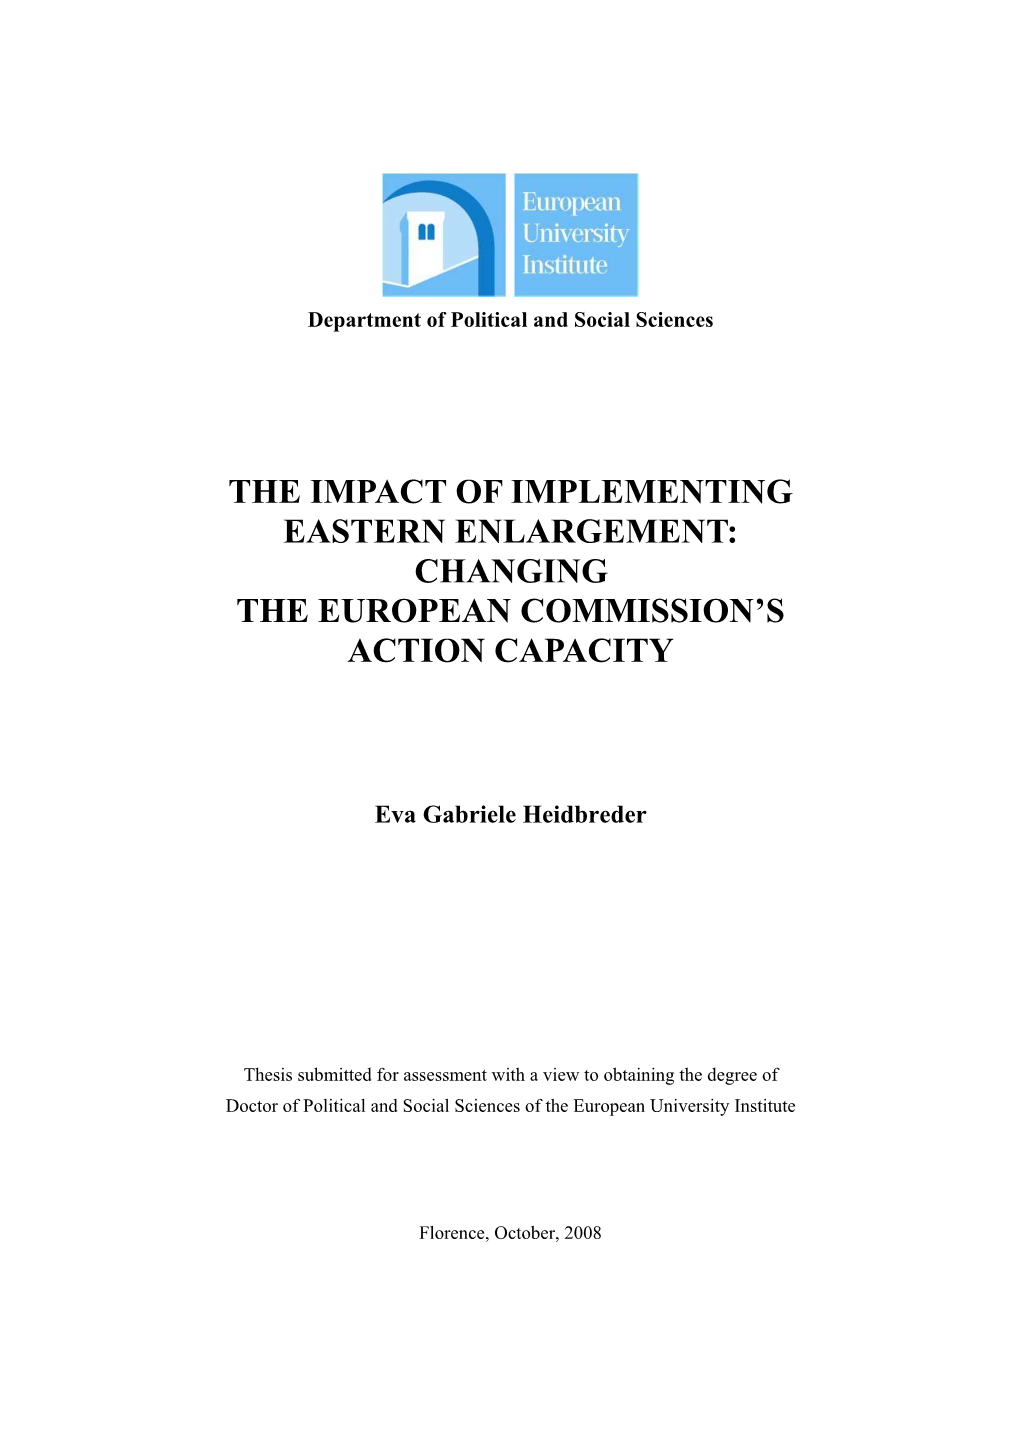 The Impact of Implementing Eastern Enlargement: Changing the European Commission’S Action Capacity